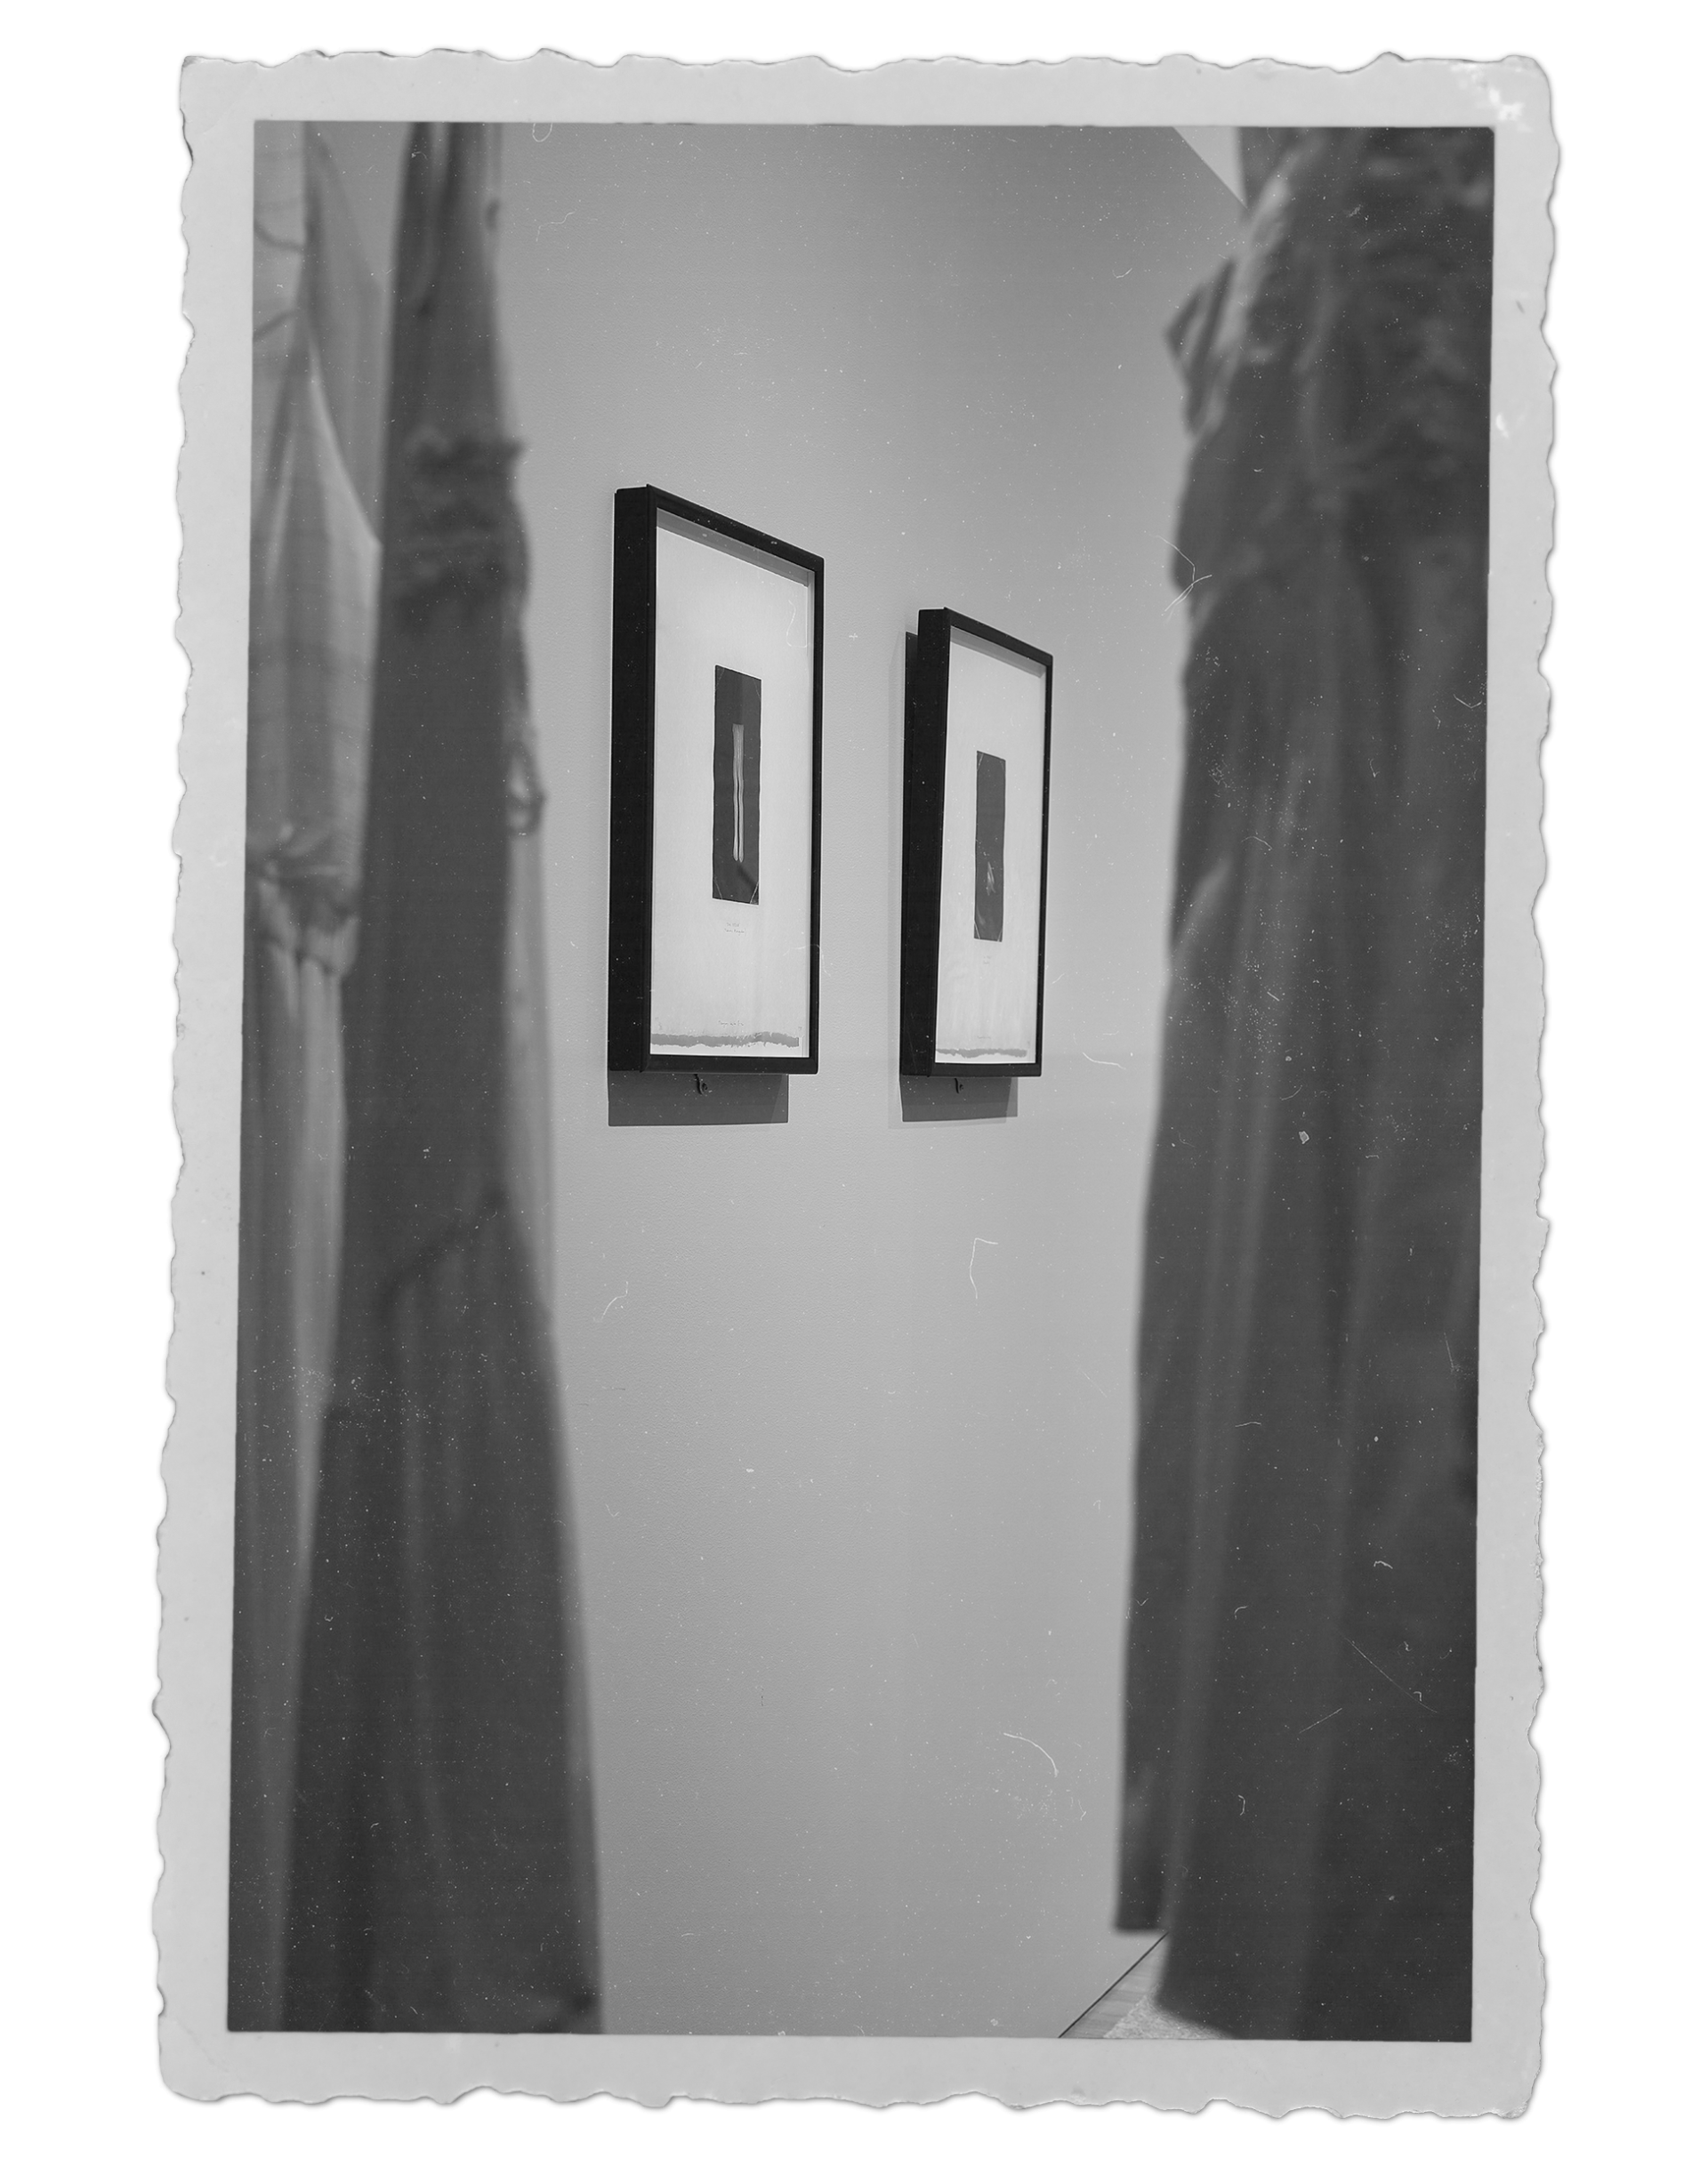 "Old" photograph of two prints by Milagros de la Torre, viewed through hanging white dresses